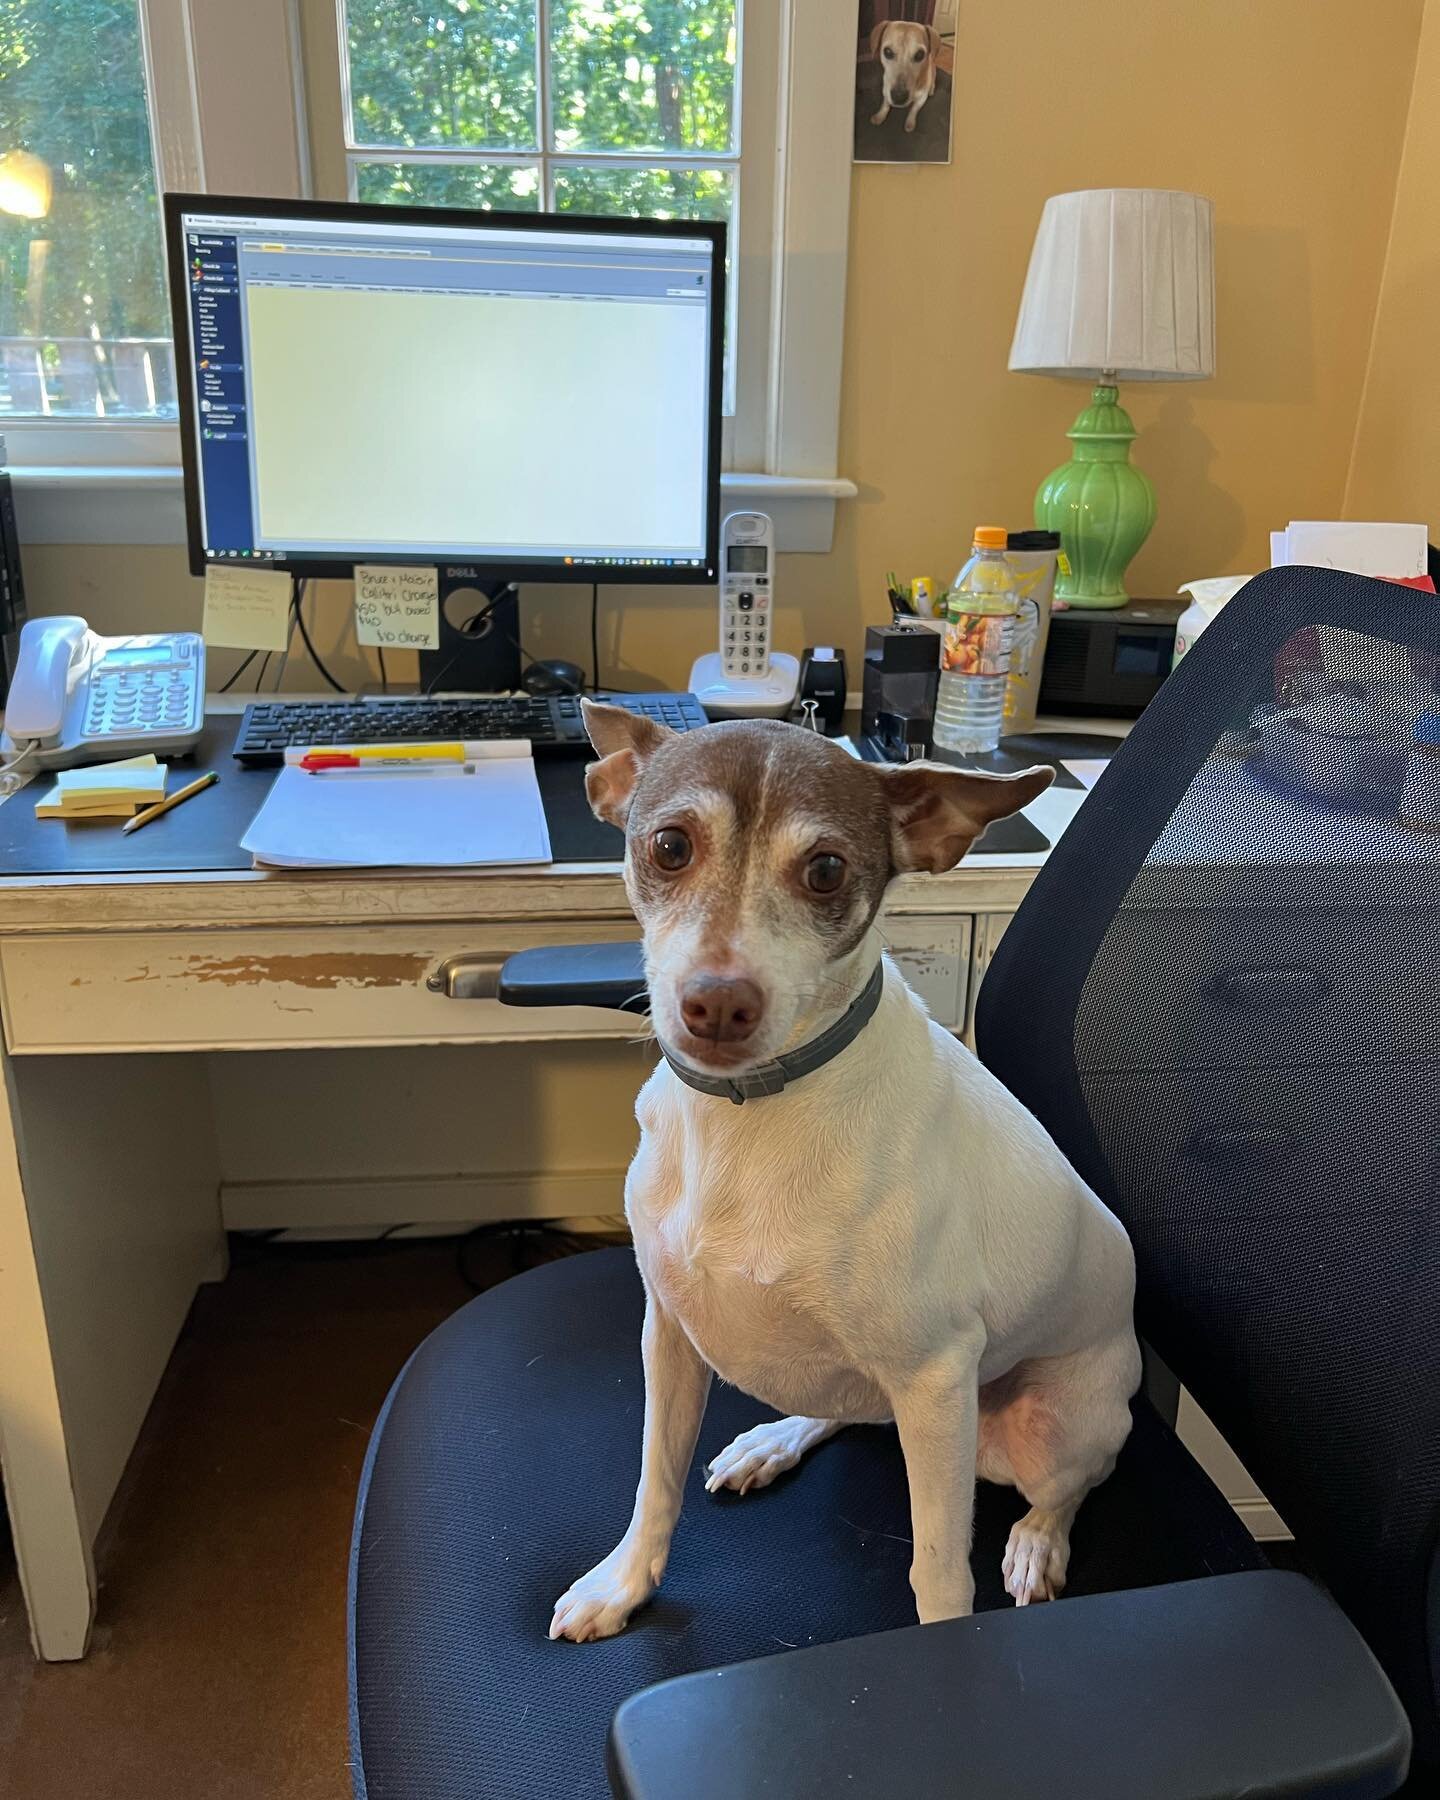 Lucy insisted on managing the office today 😍 #workinghard #officedog #cutie #rescuedog #dogsofinstagram #dogsarethebest